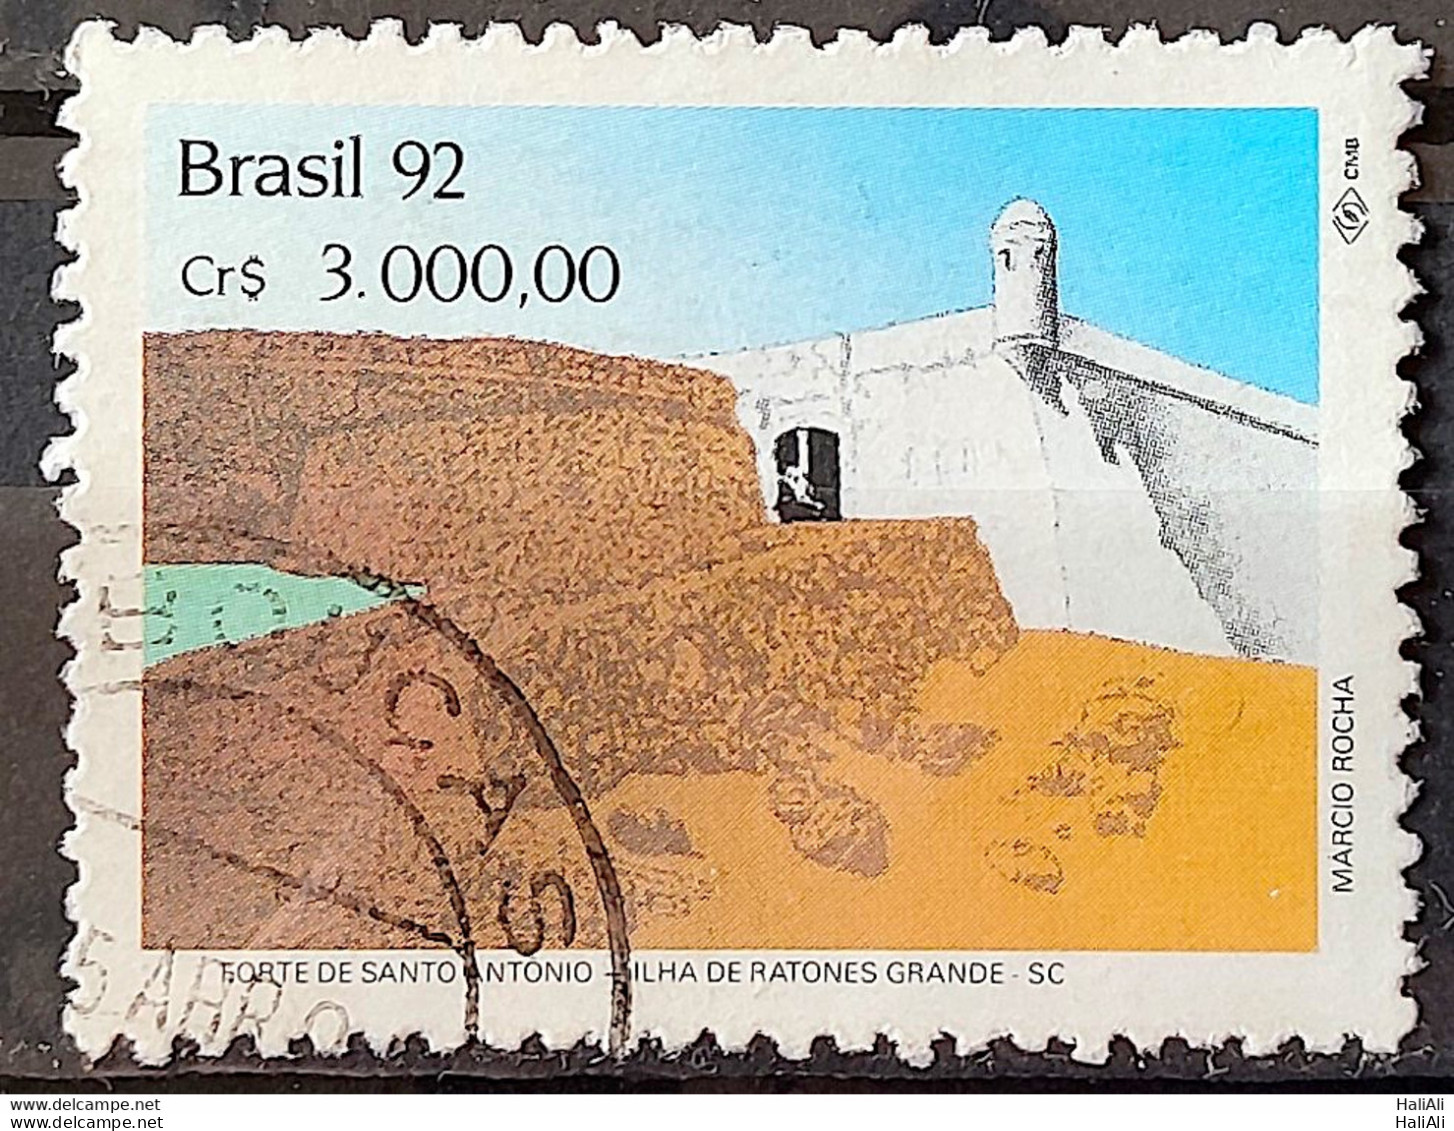 C 1816 Brazil Stamp Strong Military Architecture Big Ratone Island SC 1992 Circulated 1 - Gebraucht